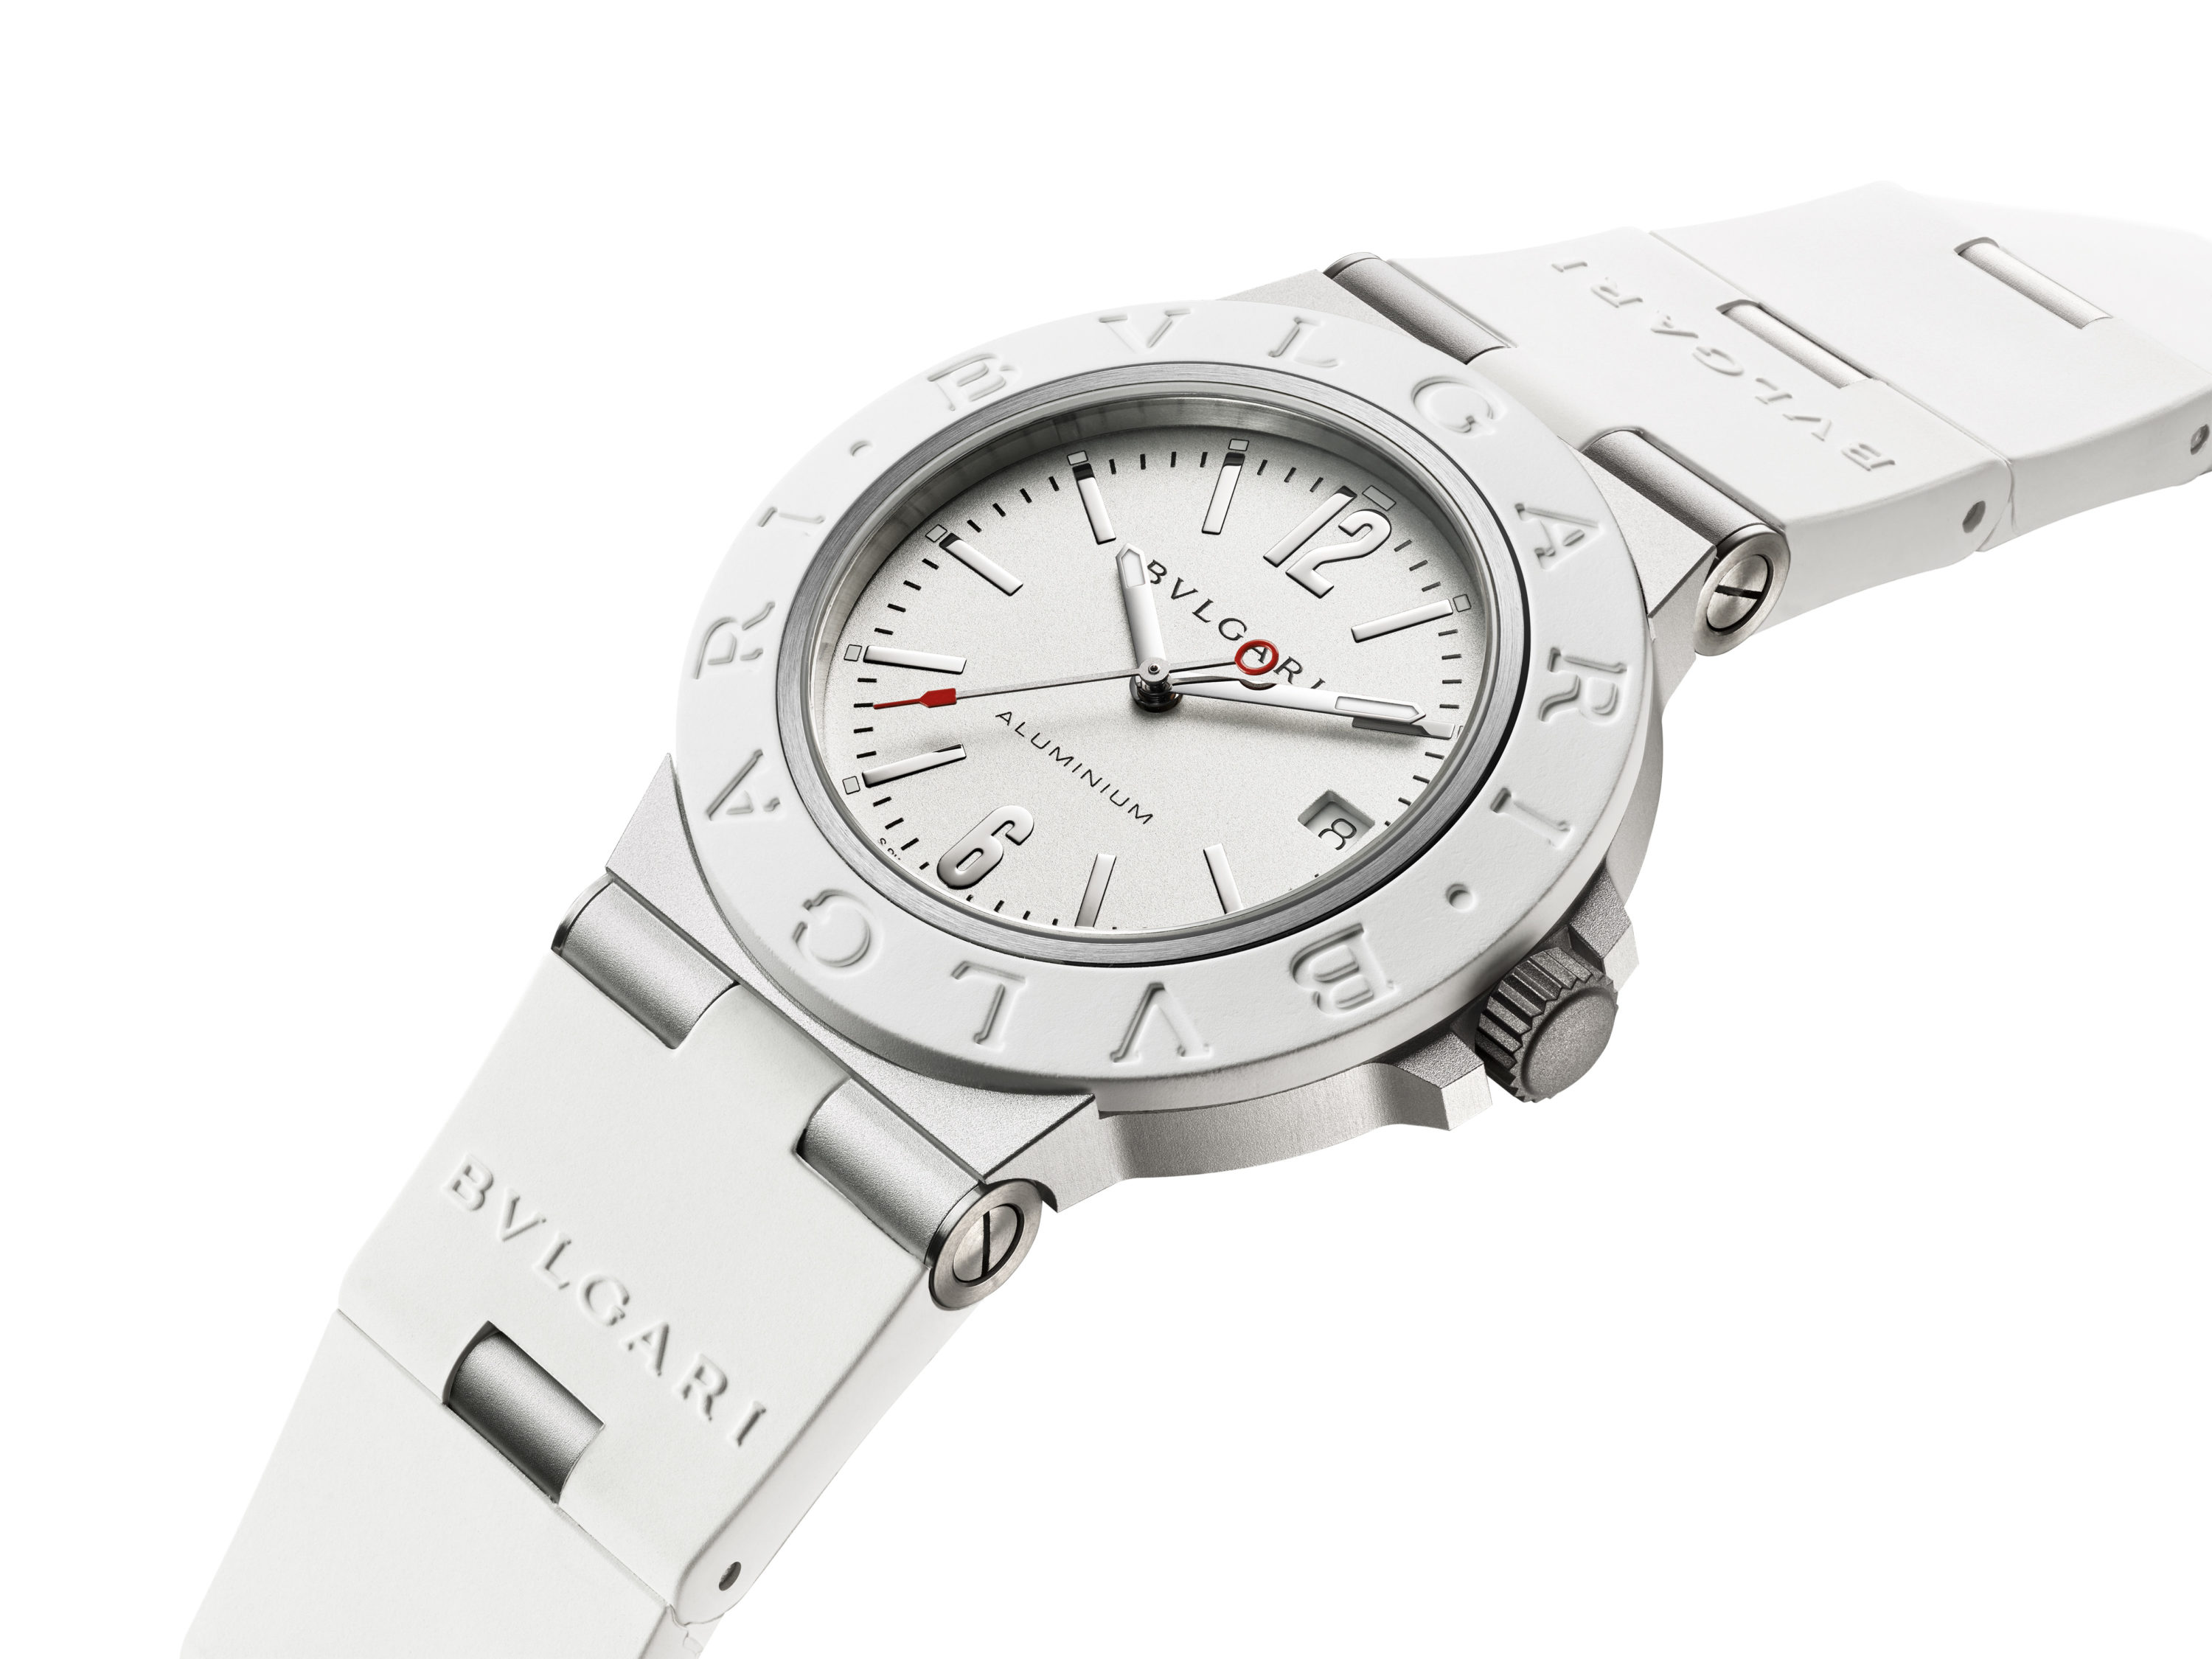 Omega’s White Dialed Speedmaster Professional is Here